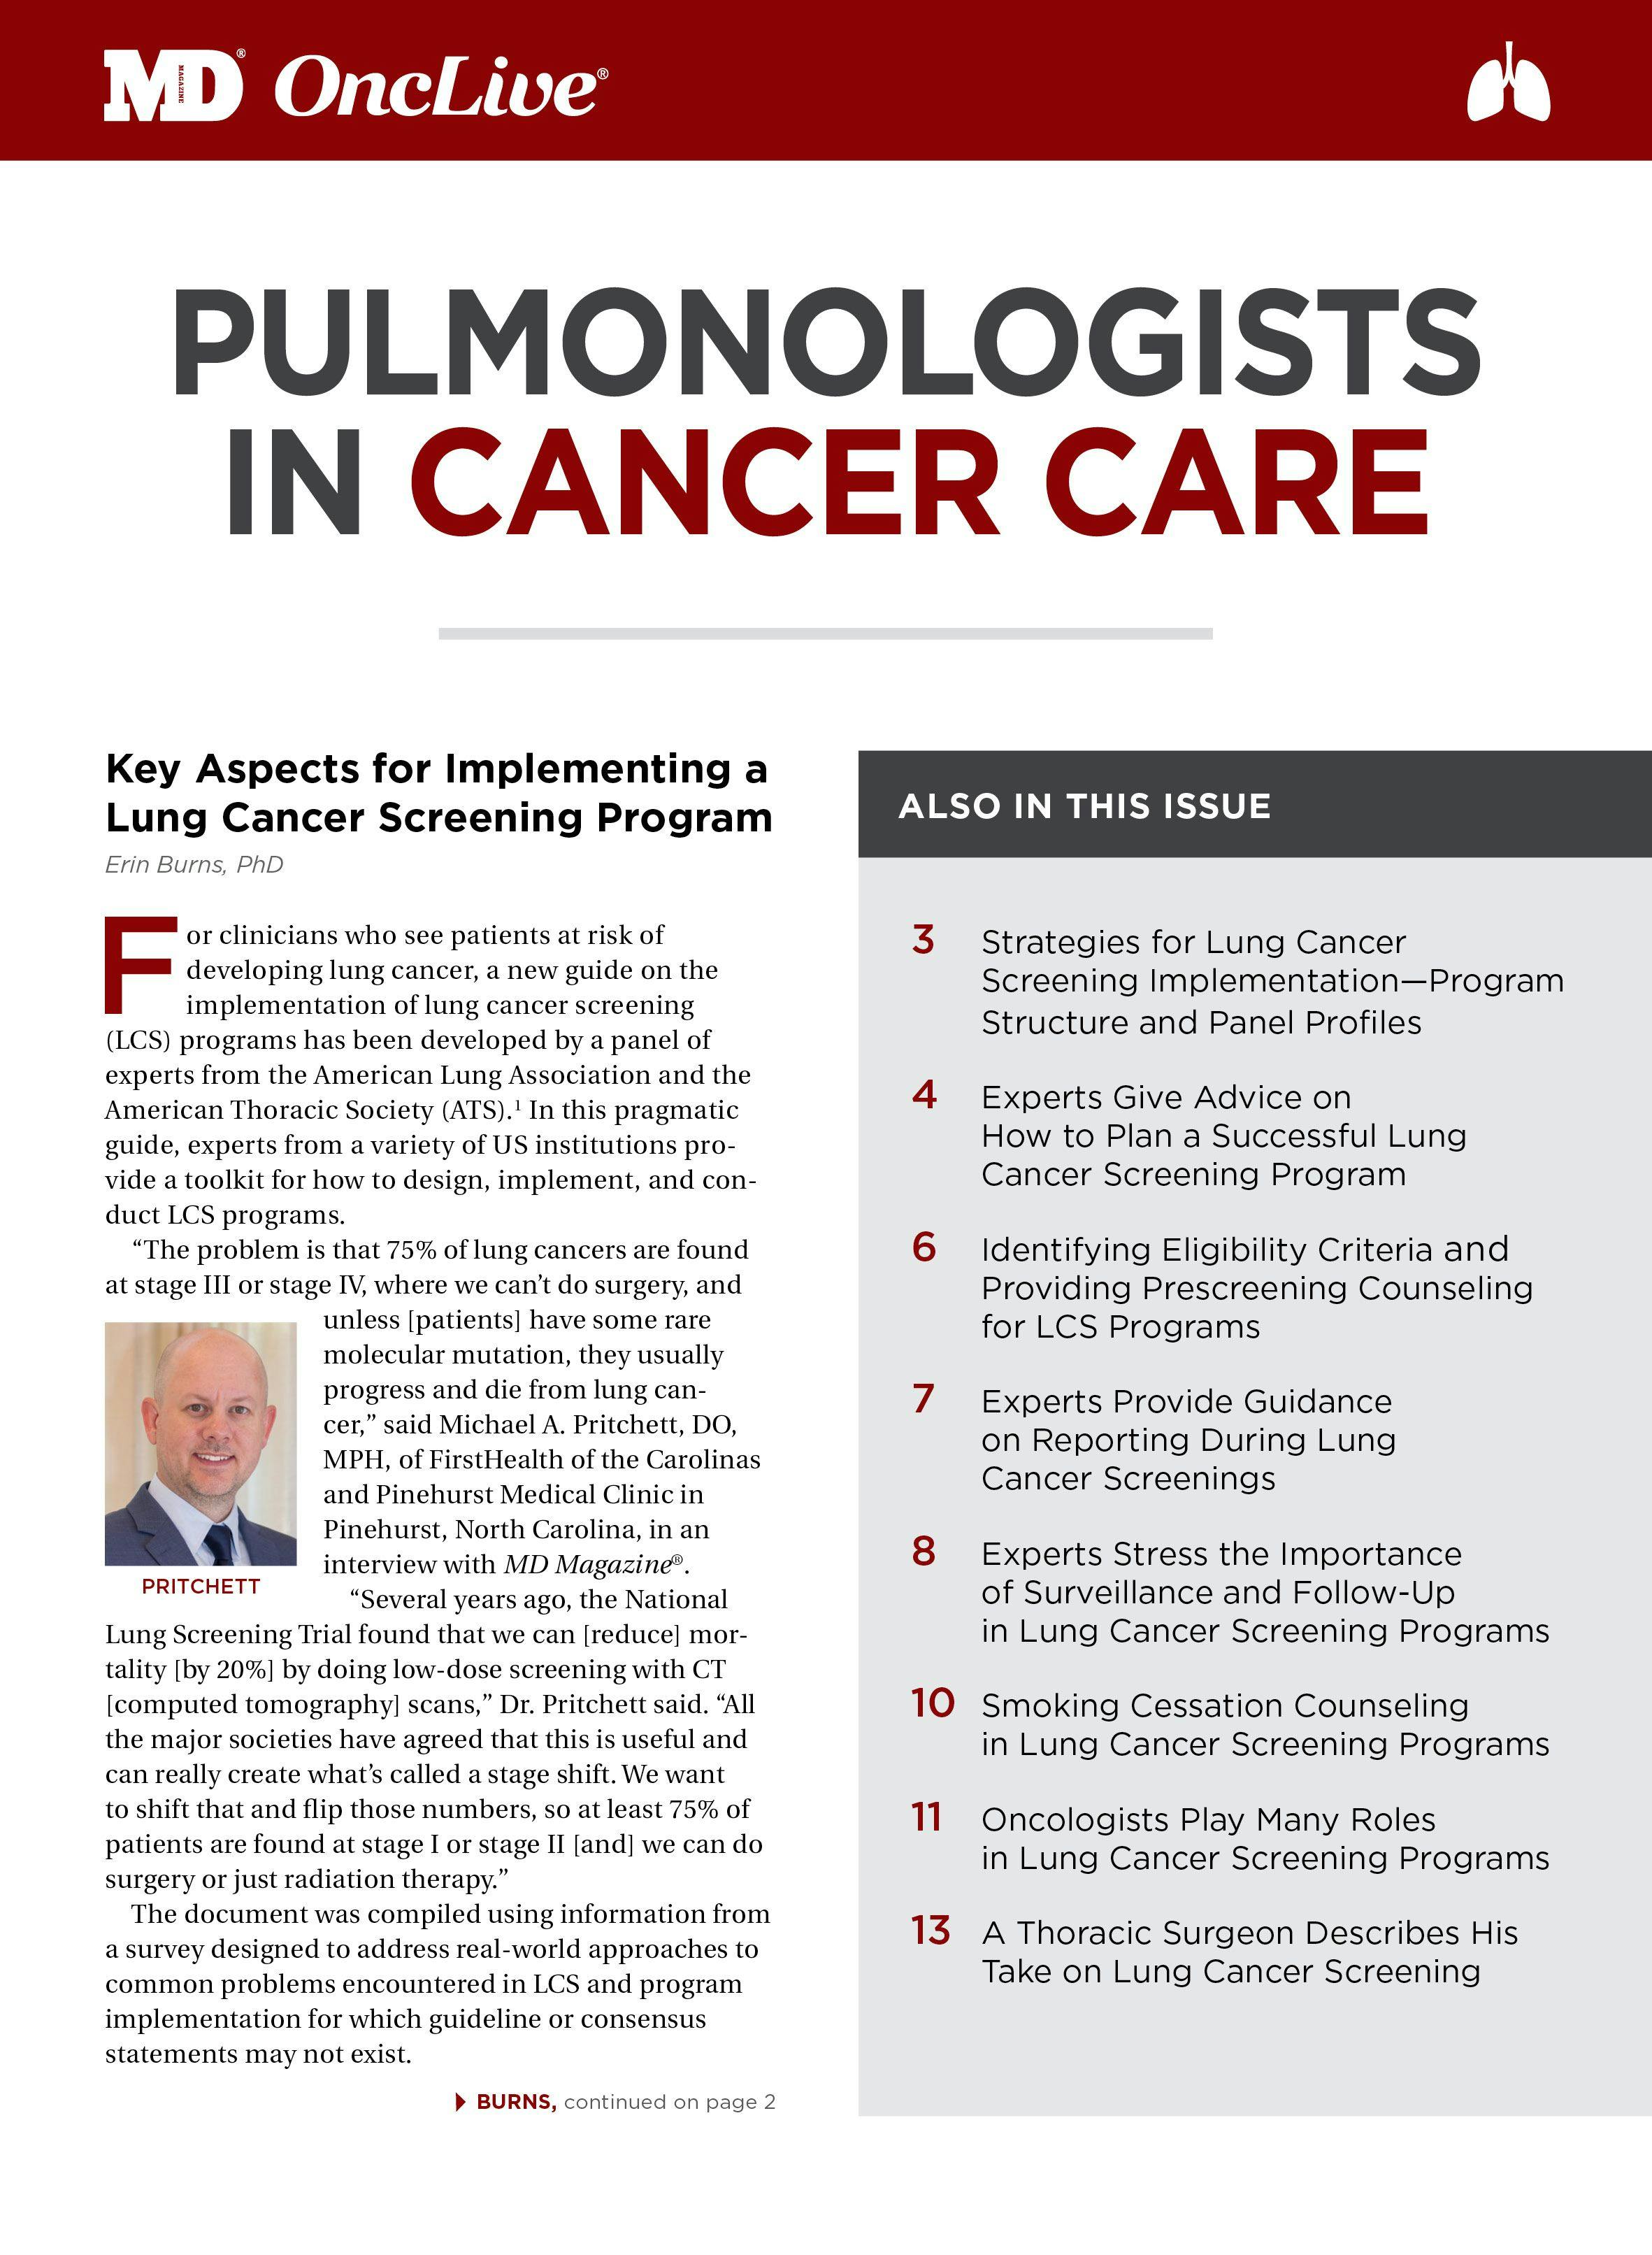 Pulmonologists in Cancer Care